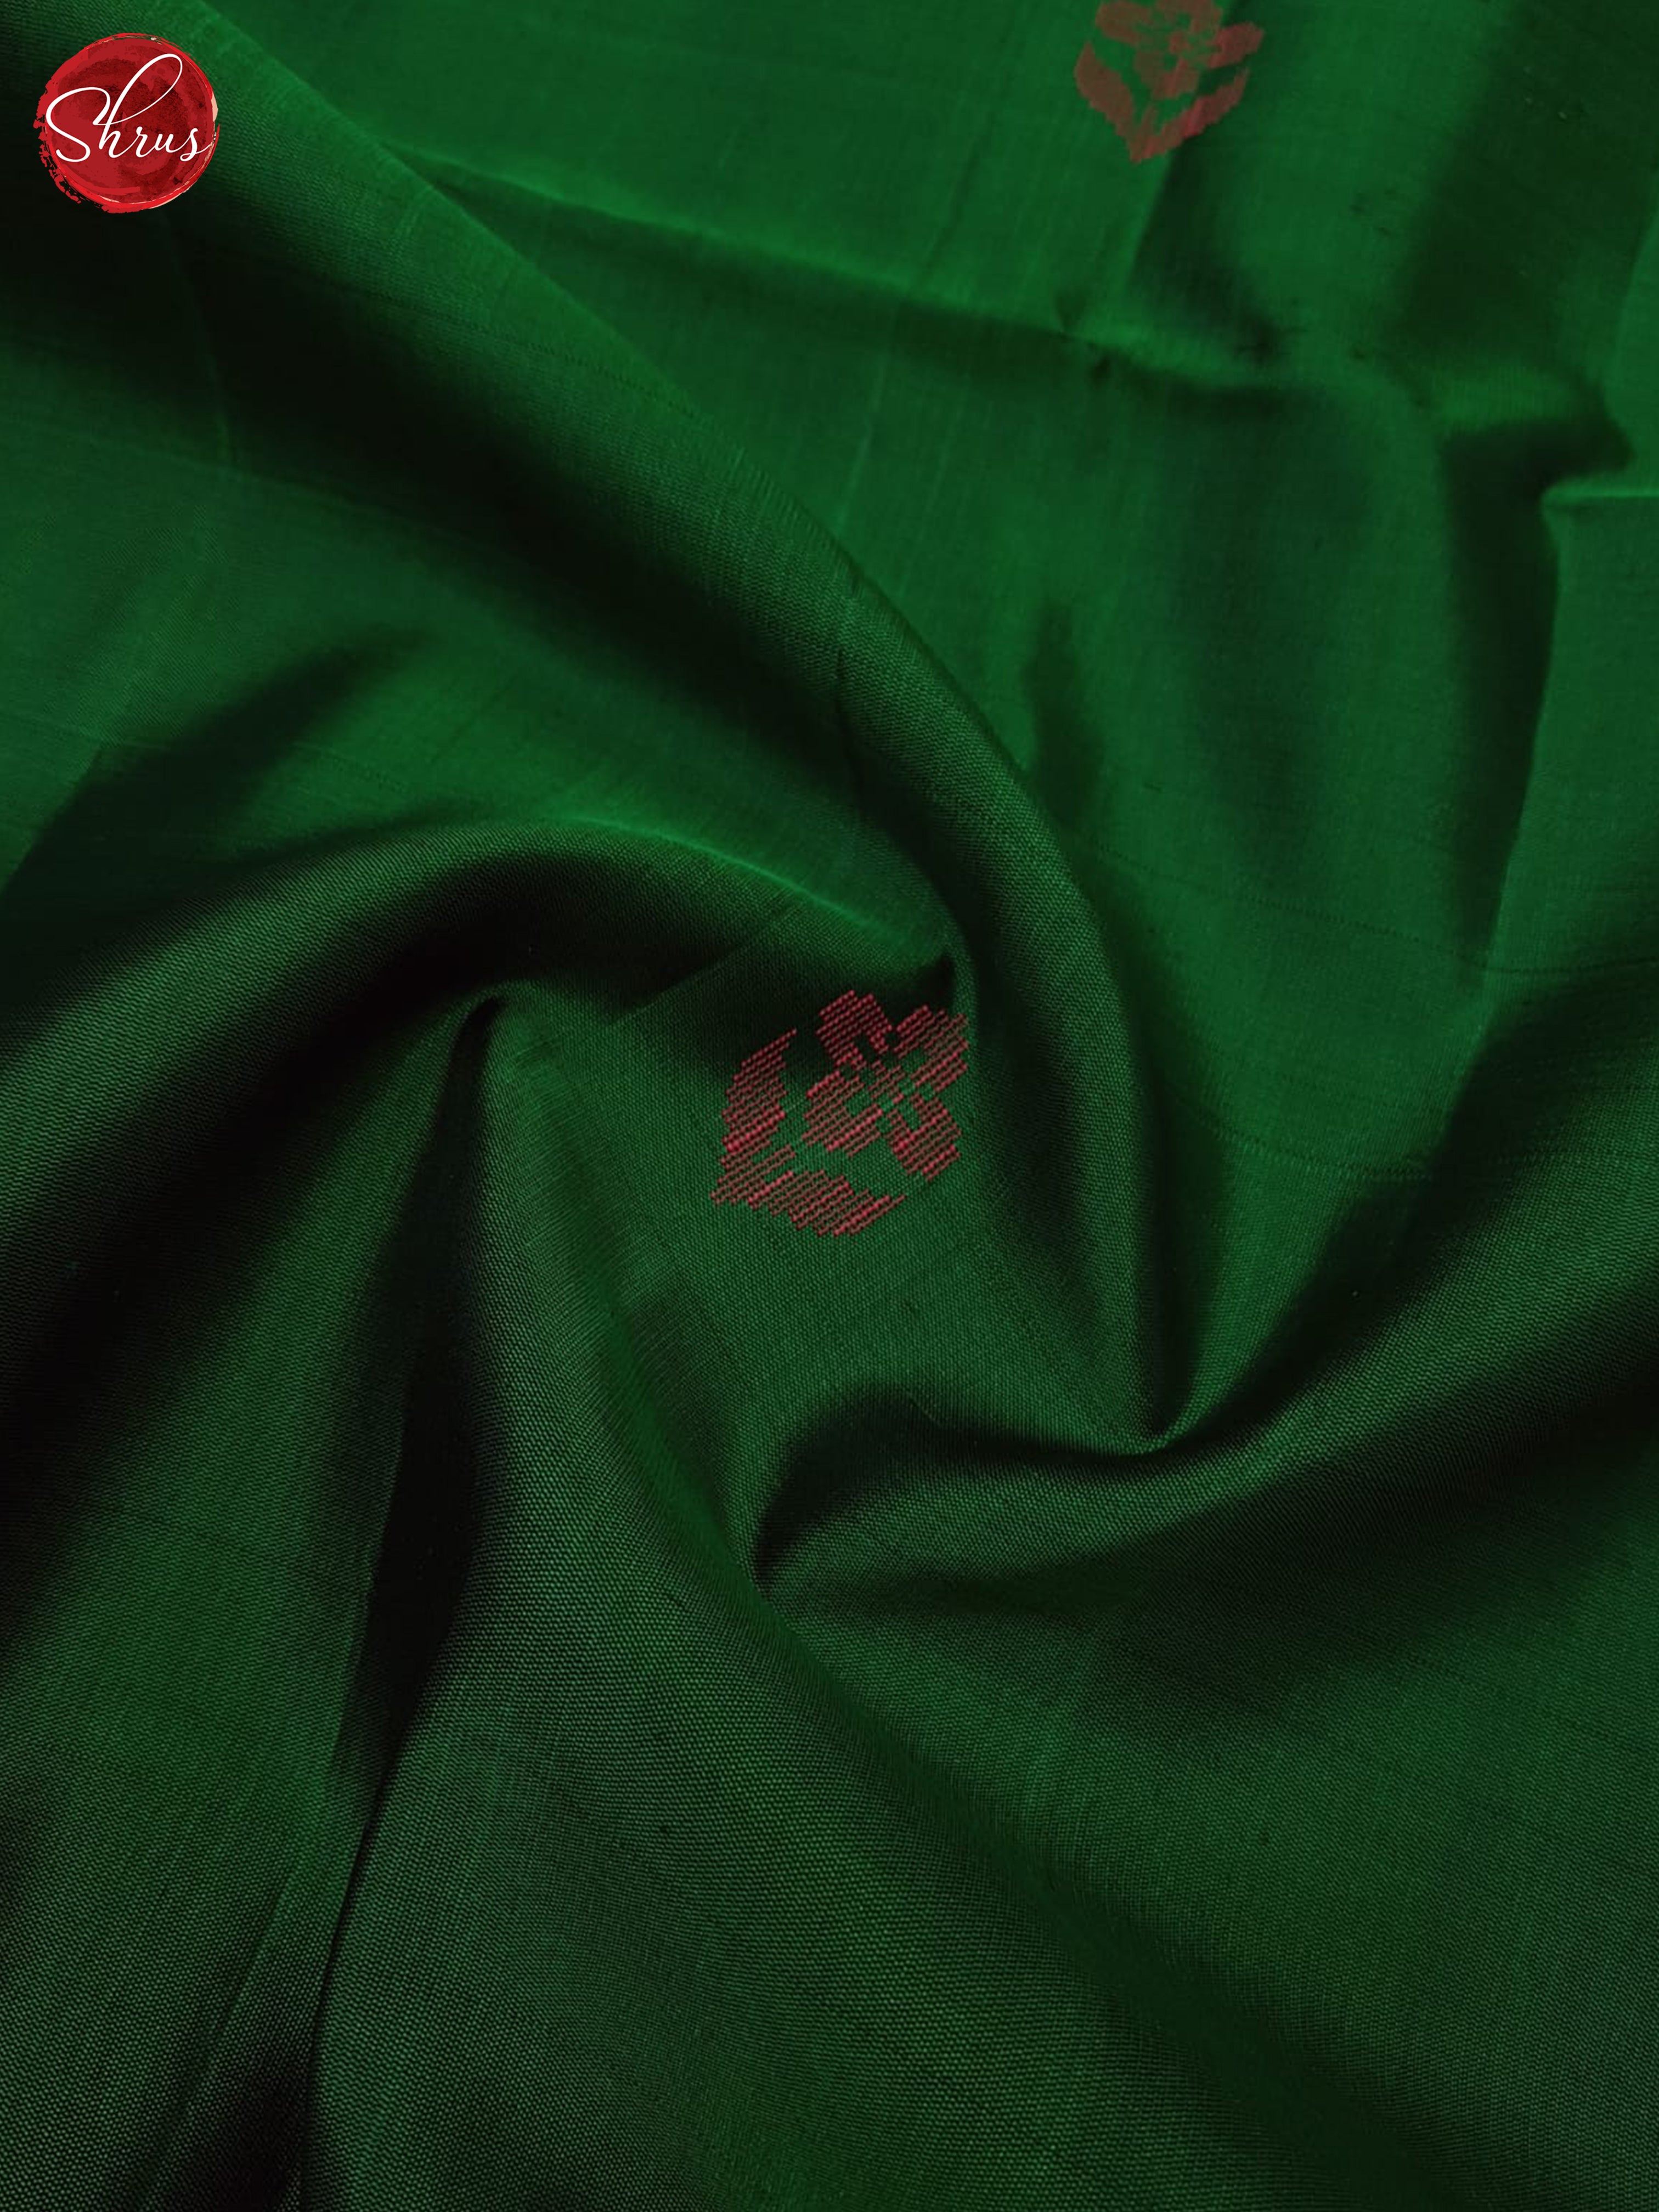 Green And Red - Shop on ShrusEternity.com